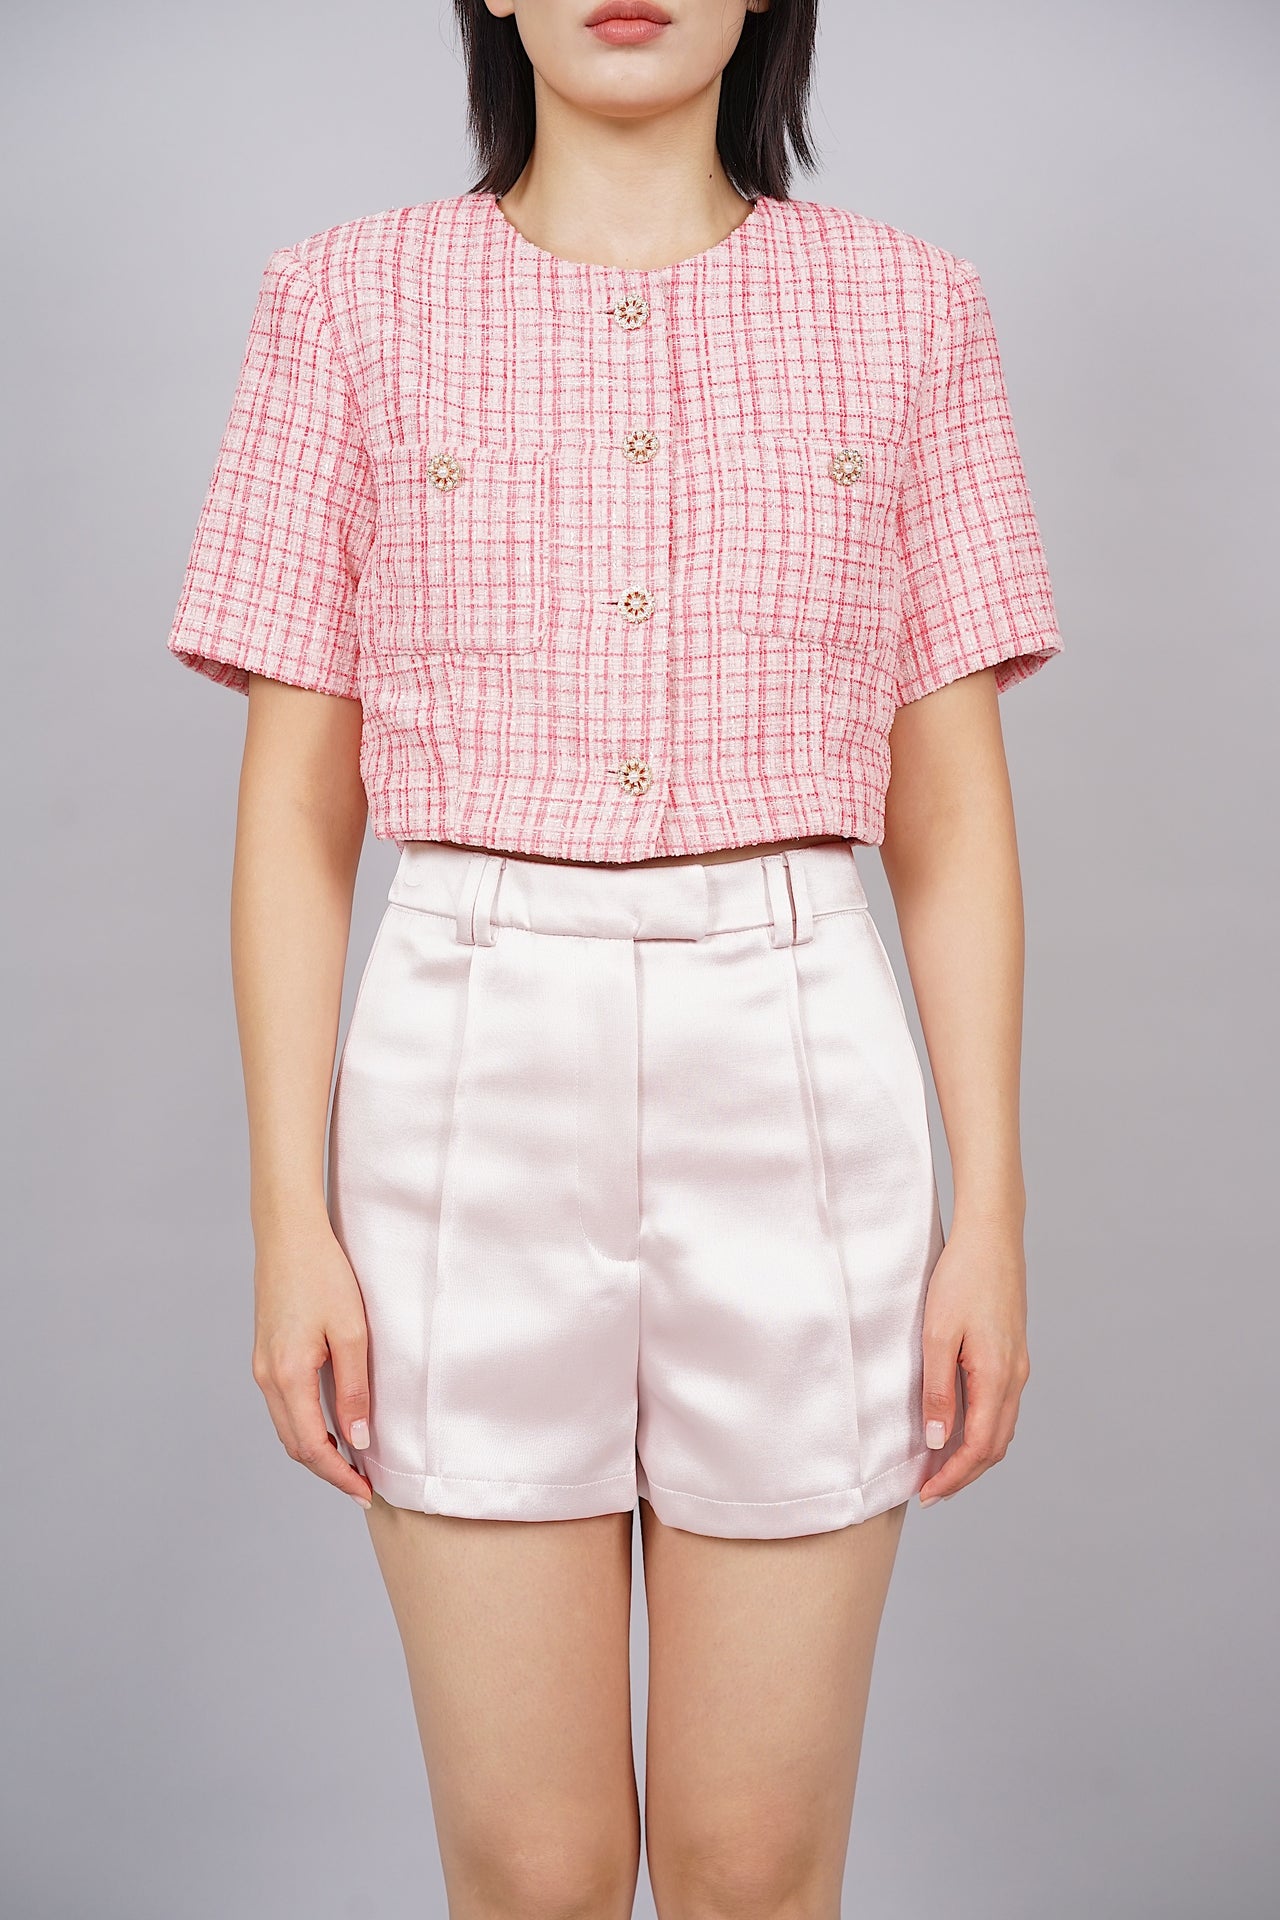 Odei Cropped Tweed Jacket in Pink